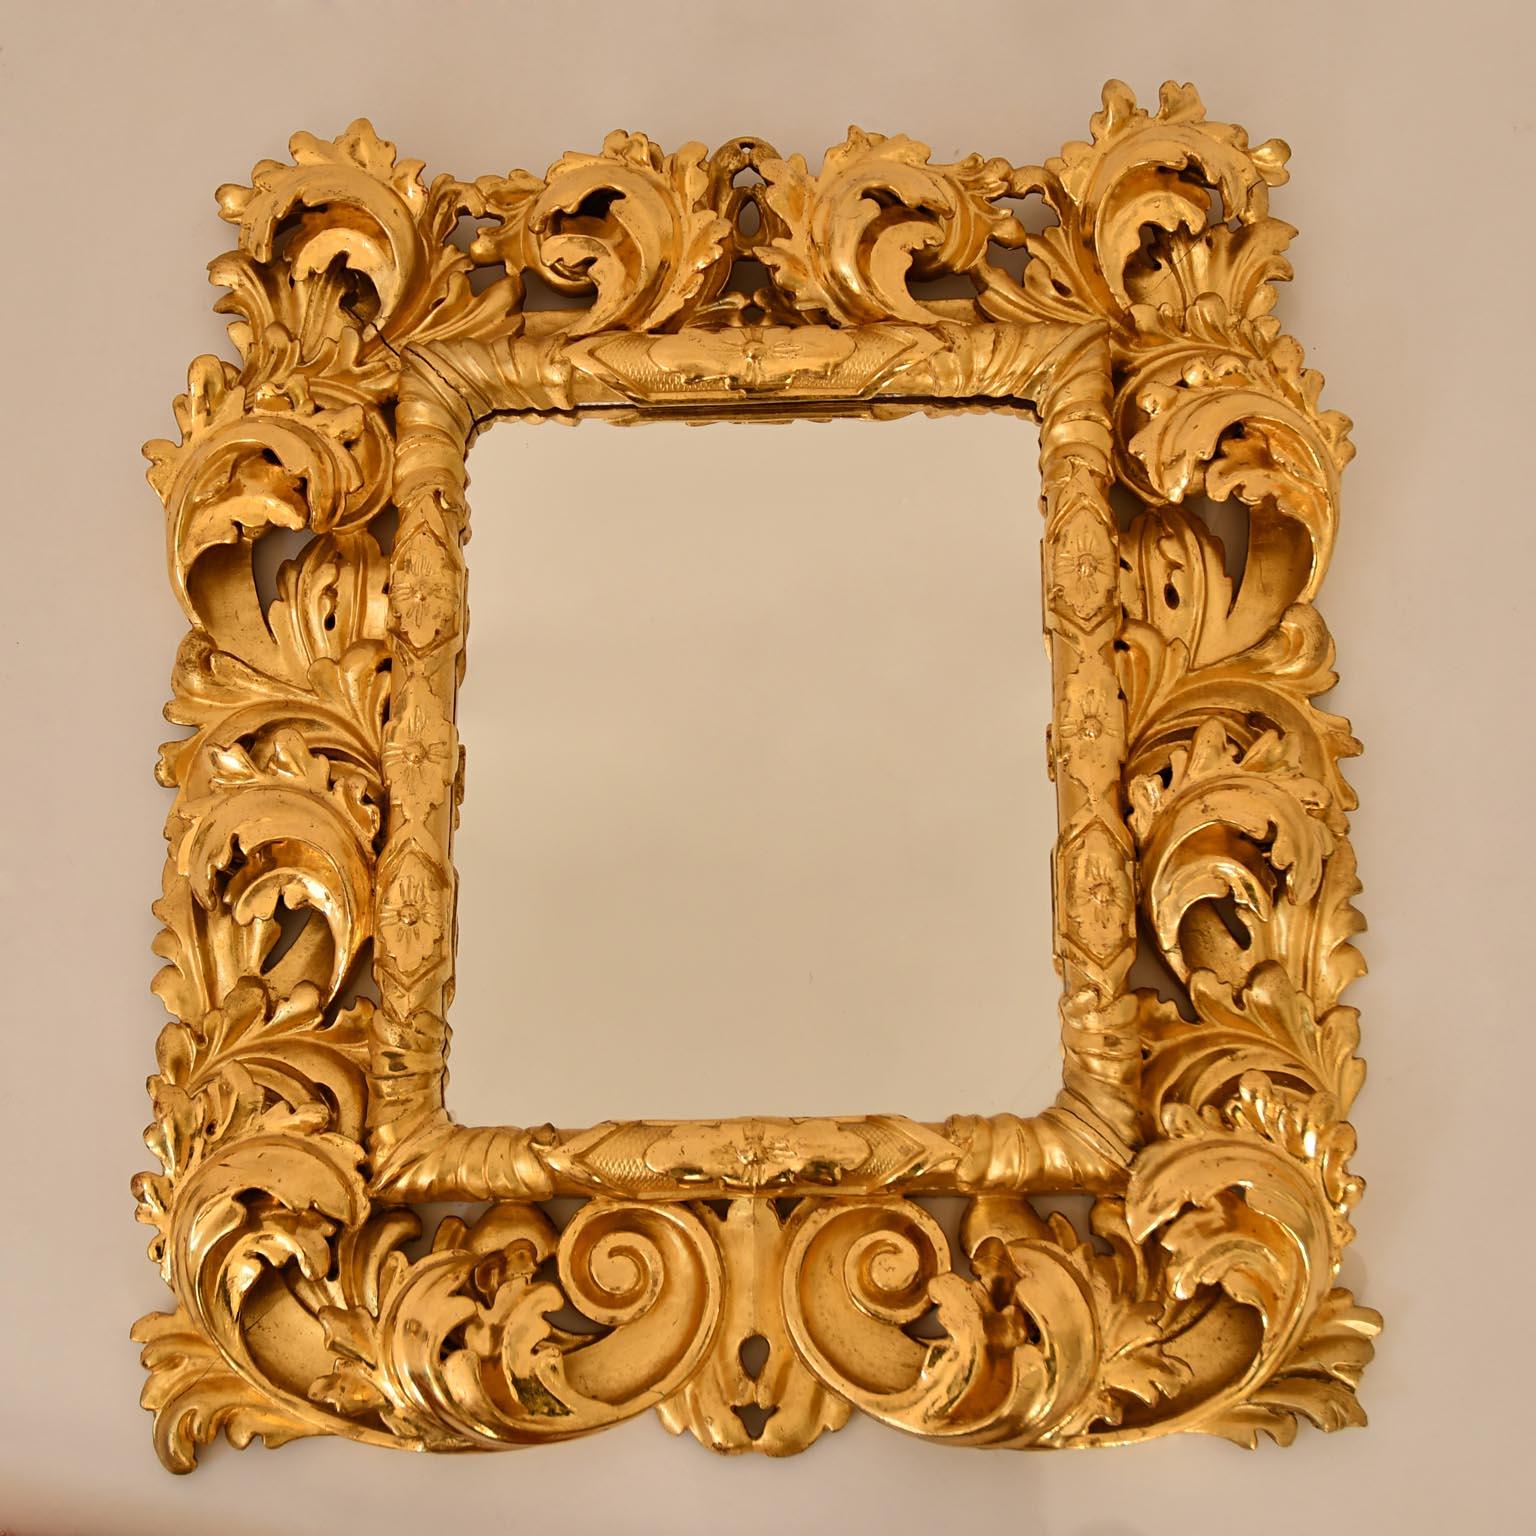 Florentine Mirrow Giltwood Baroque Revival Style Rectangular 19th Century In Good Condition For Sale In Vienna, AT